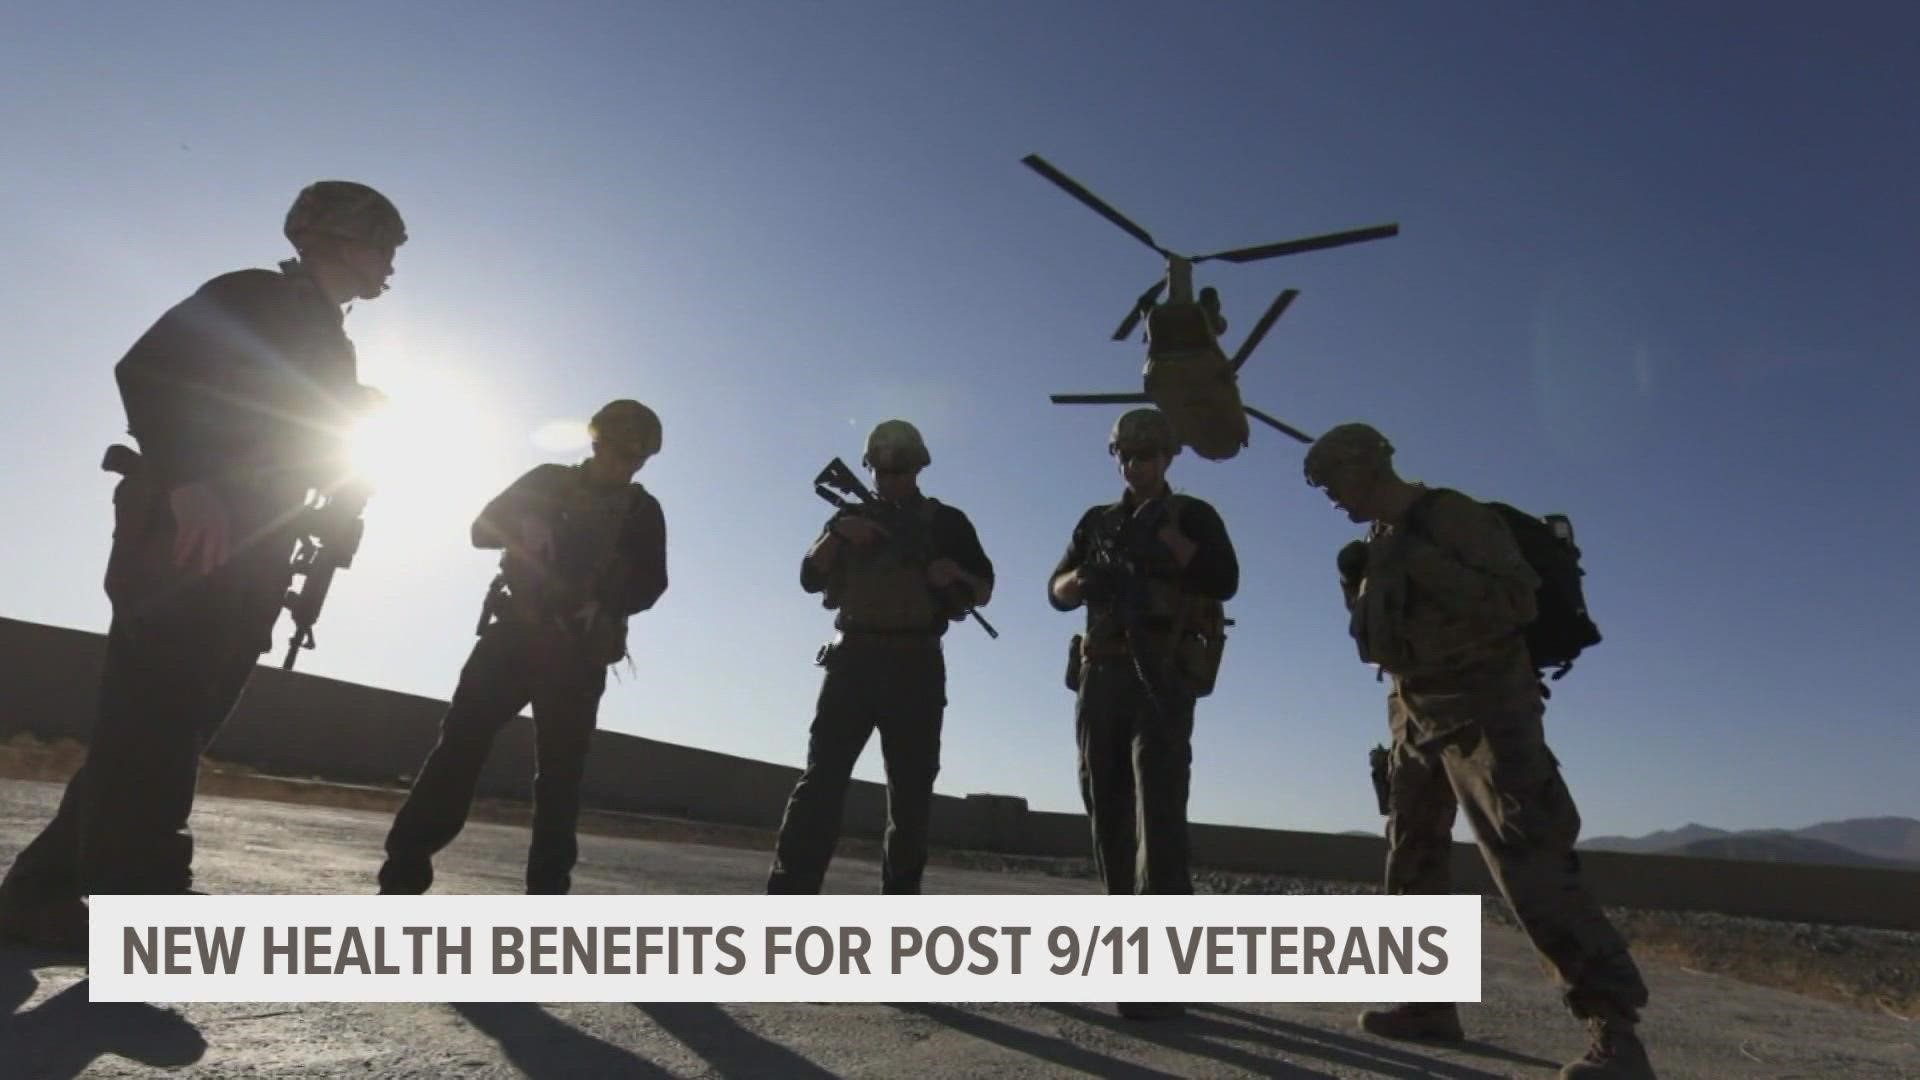 The bill's passage sets a course that could help millions who served after Sept. 11, 2001.